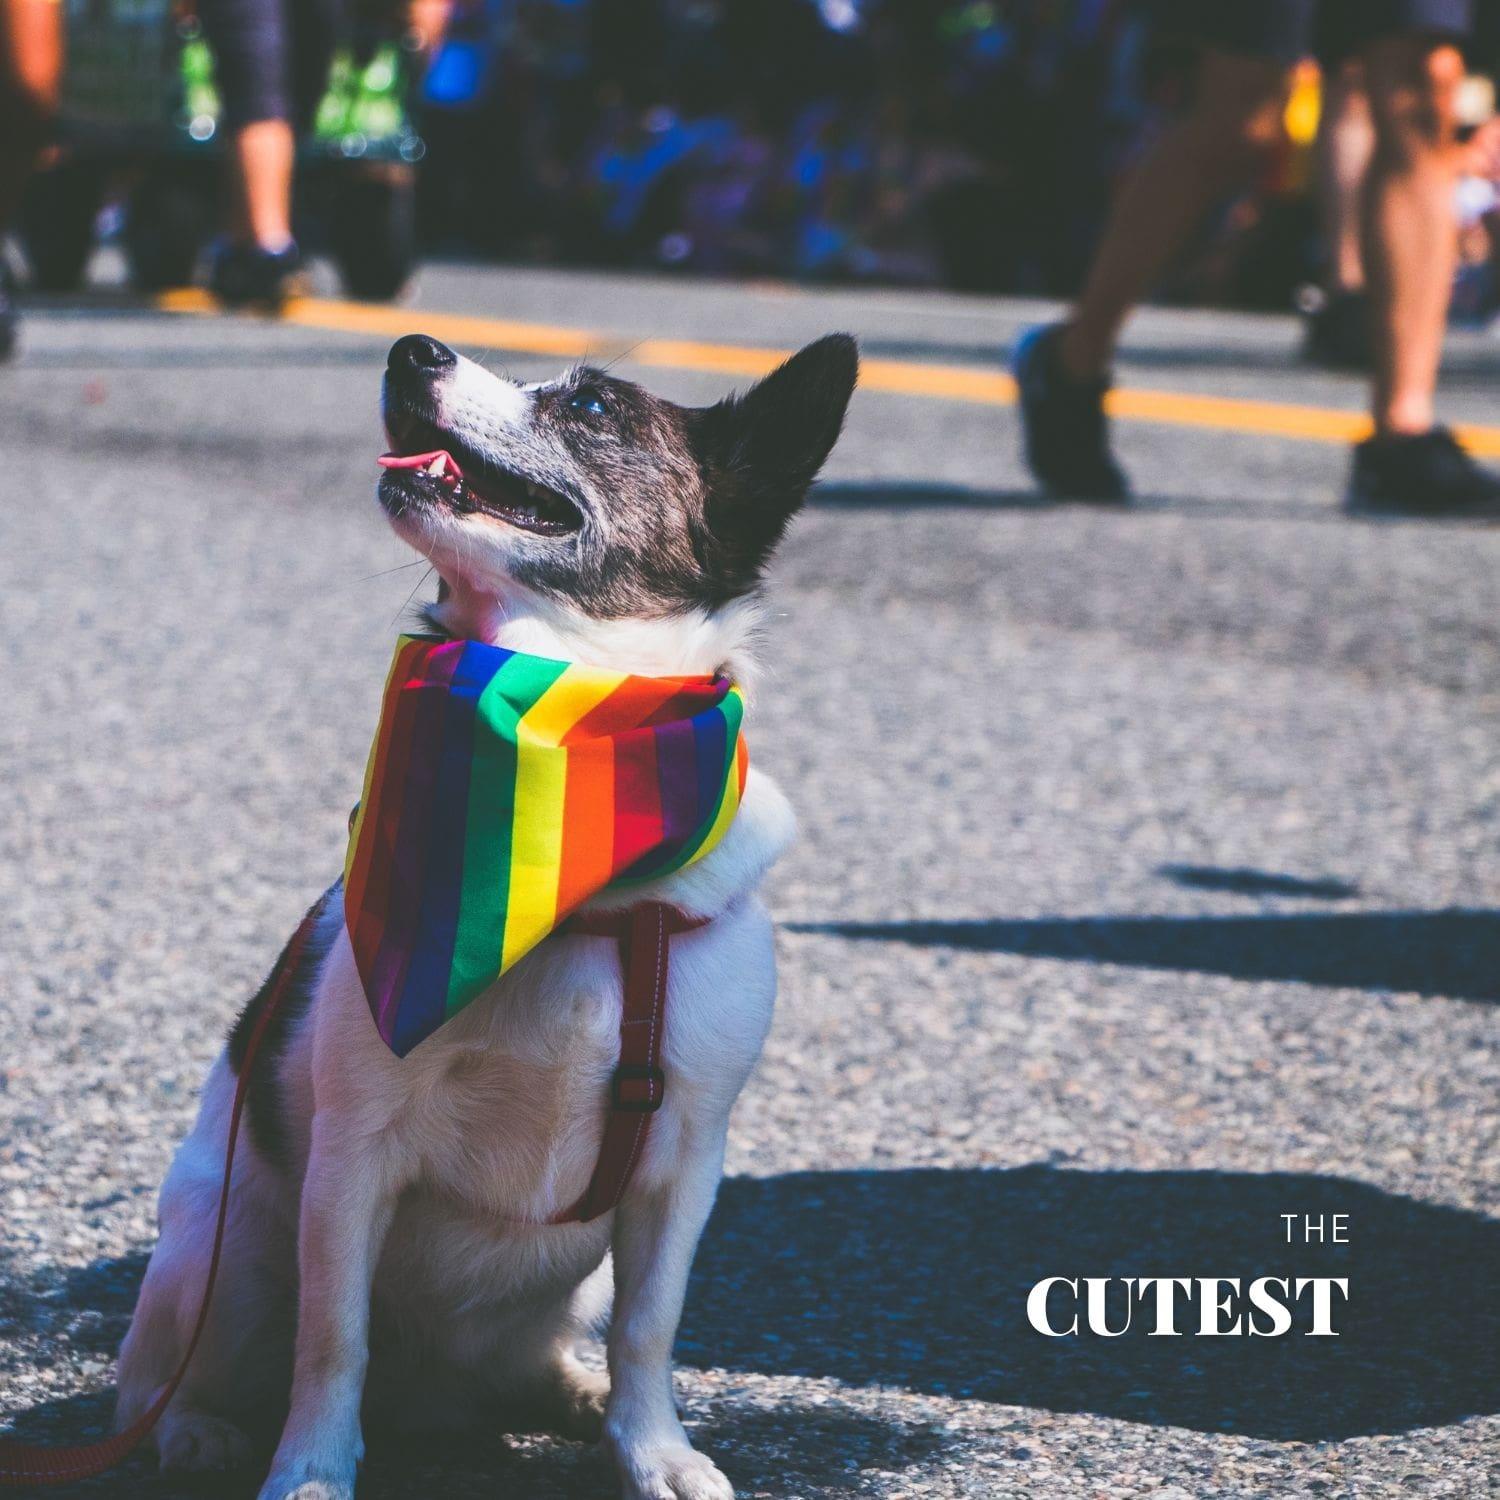 Adorable photo of a cute puppy on the street, charmingly adorned with a TOMSCOUT LGBT rainbow pride bandana around its neck. This delightful image appeals to pet lovers and members of the LGBT community in Singapore, showcasing the bandana’s universal charm.